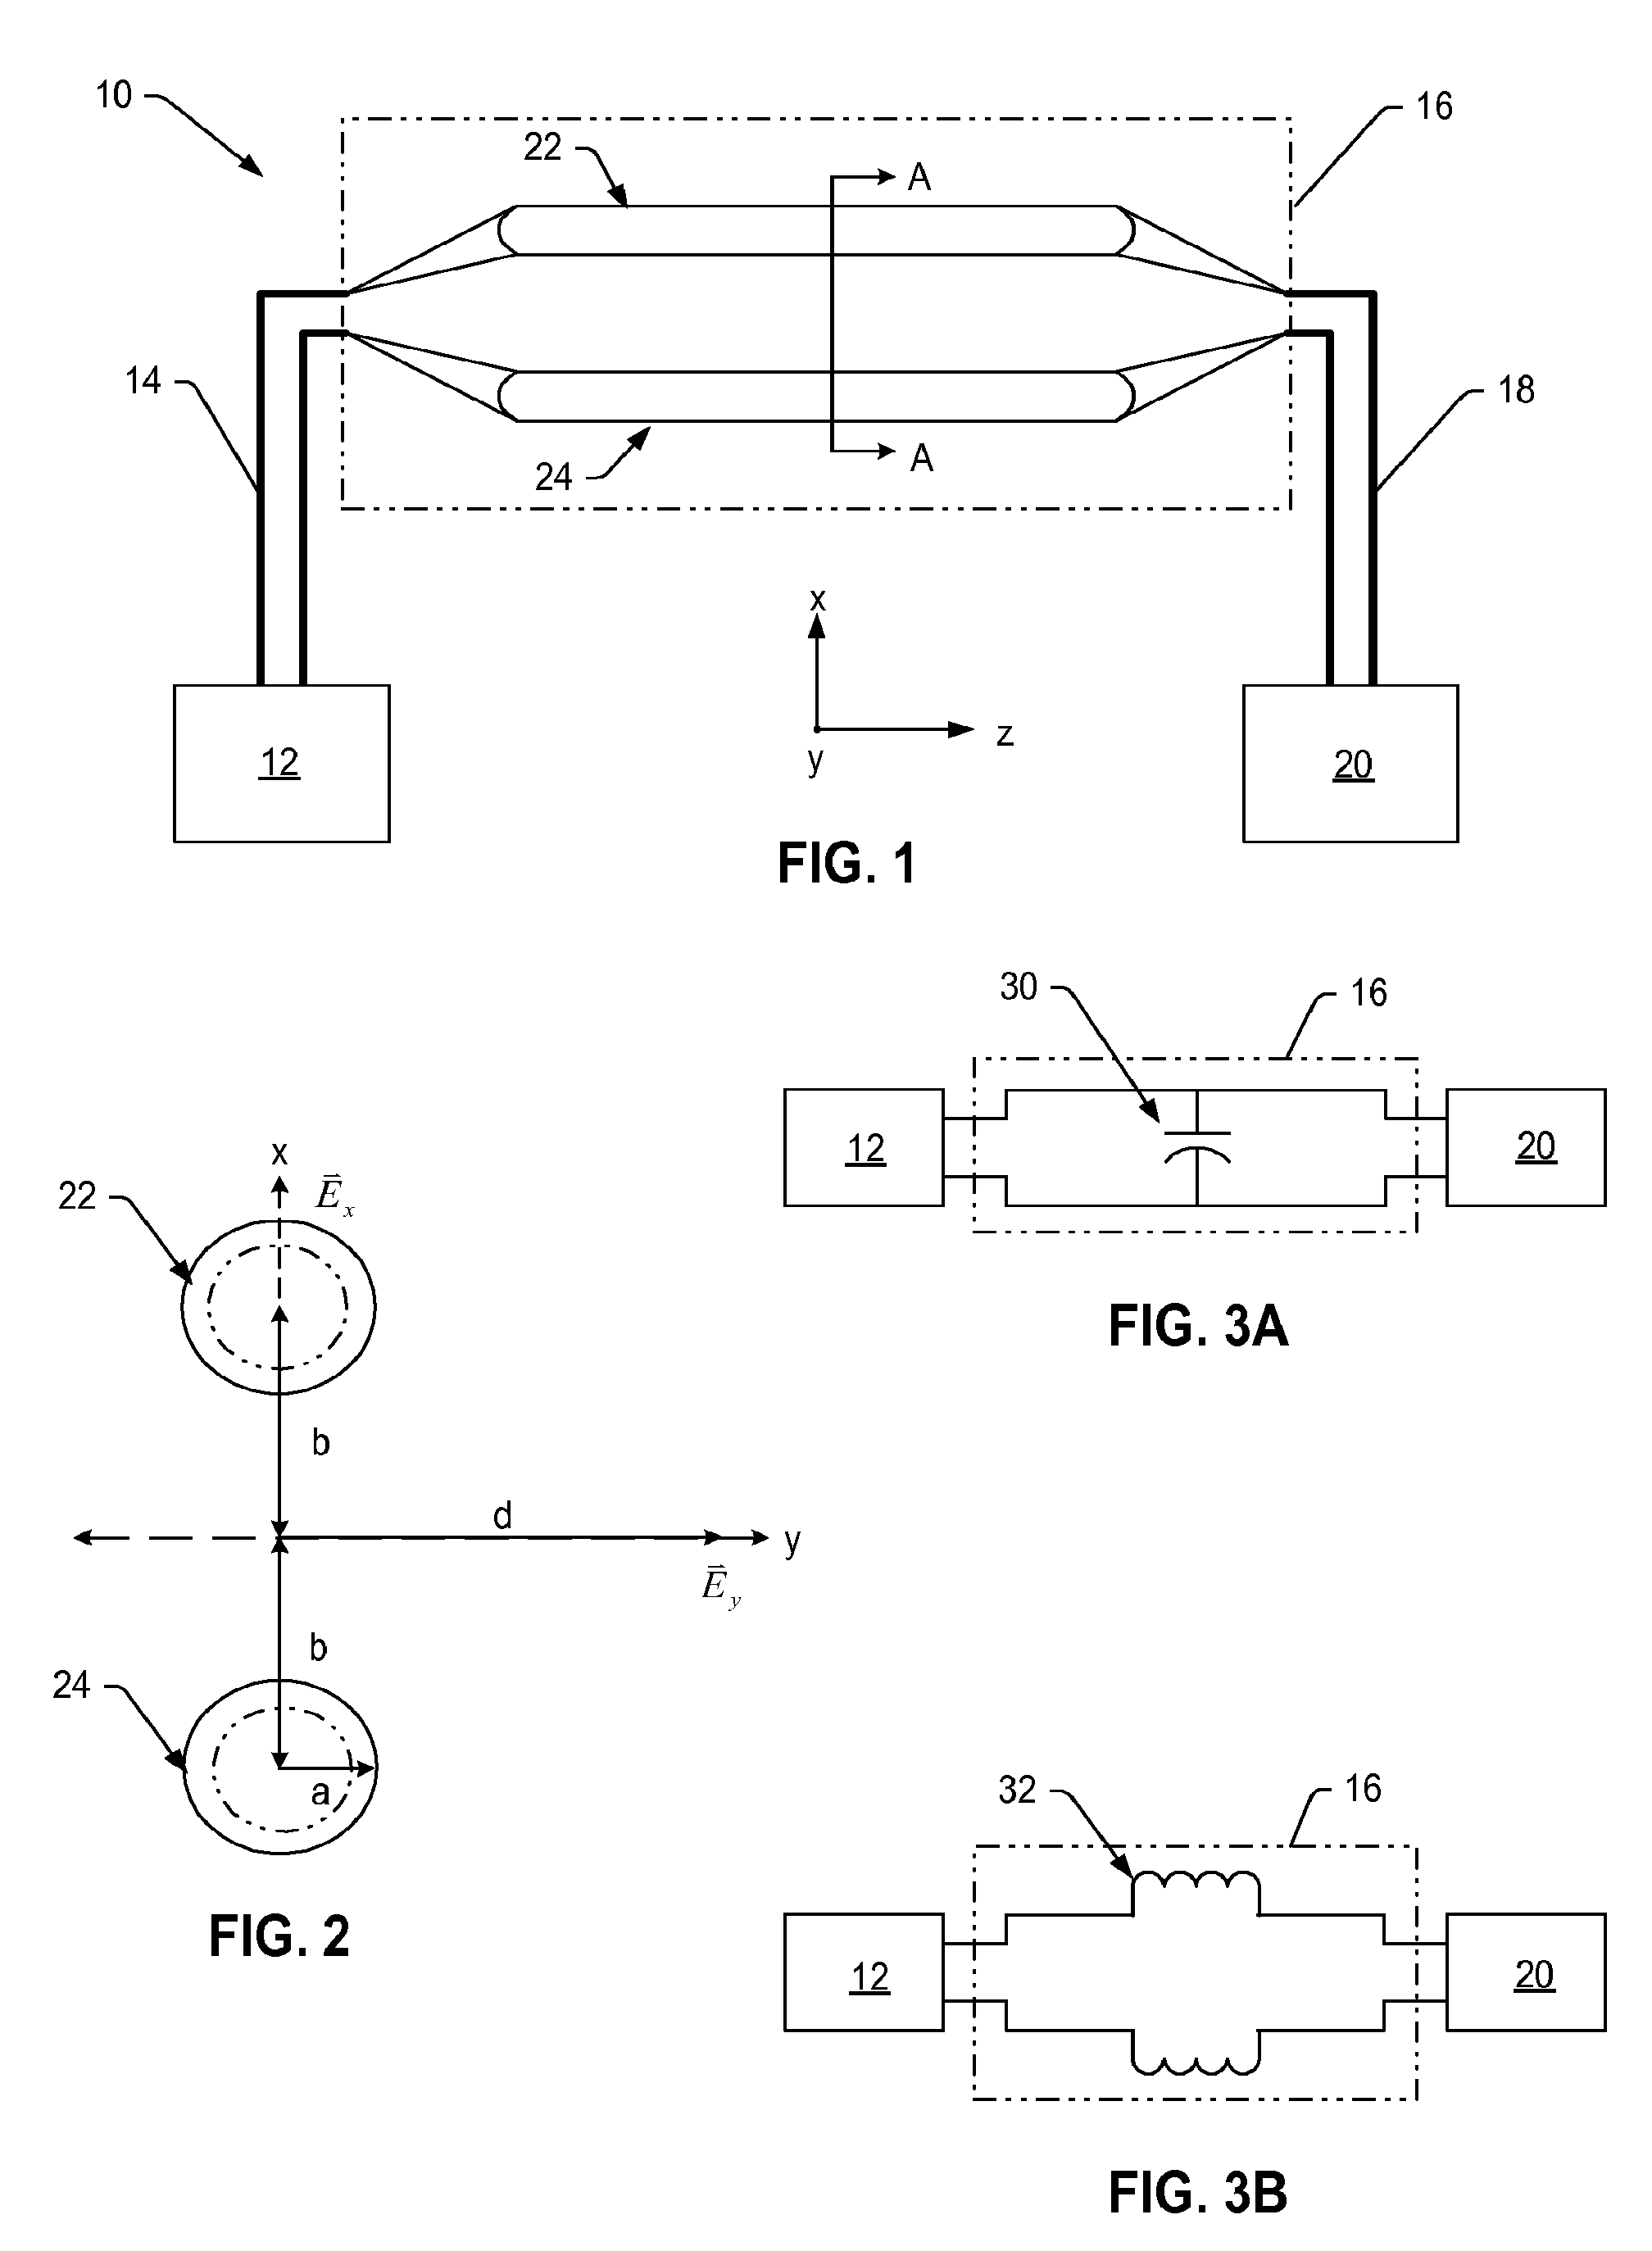 Electric field generator incorporating a slow-wave structure